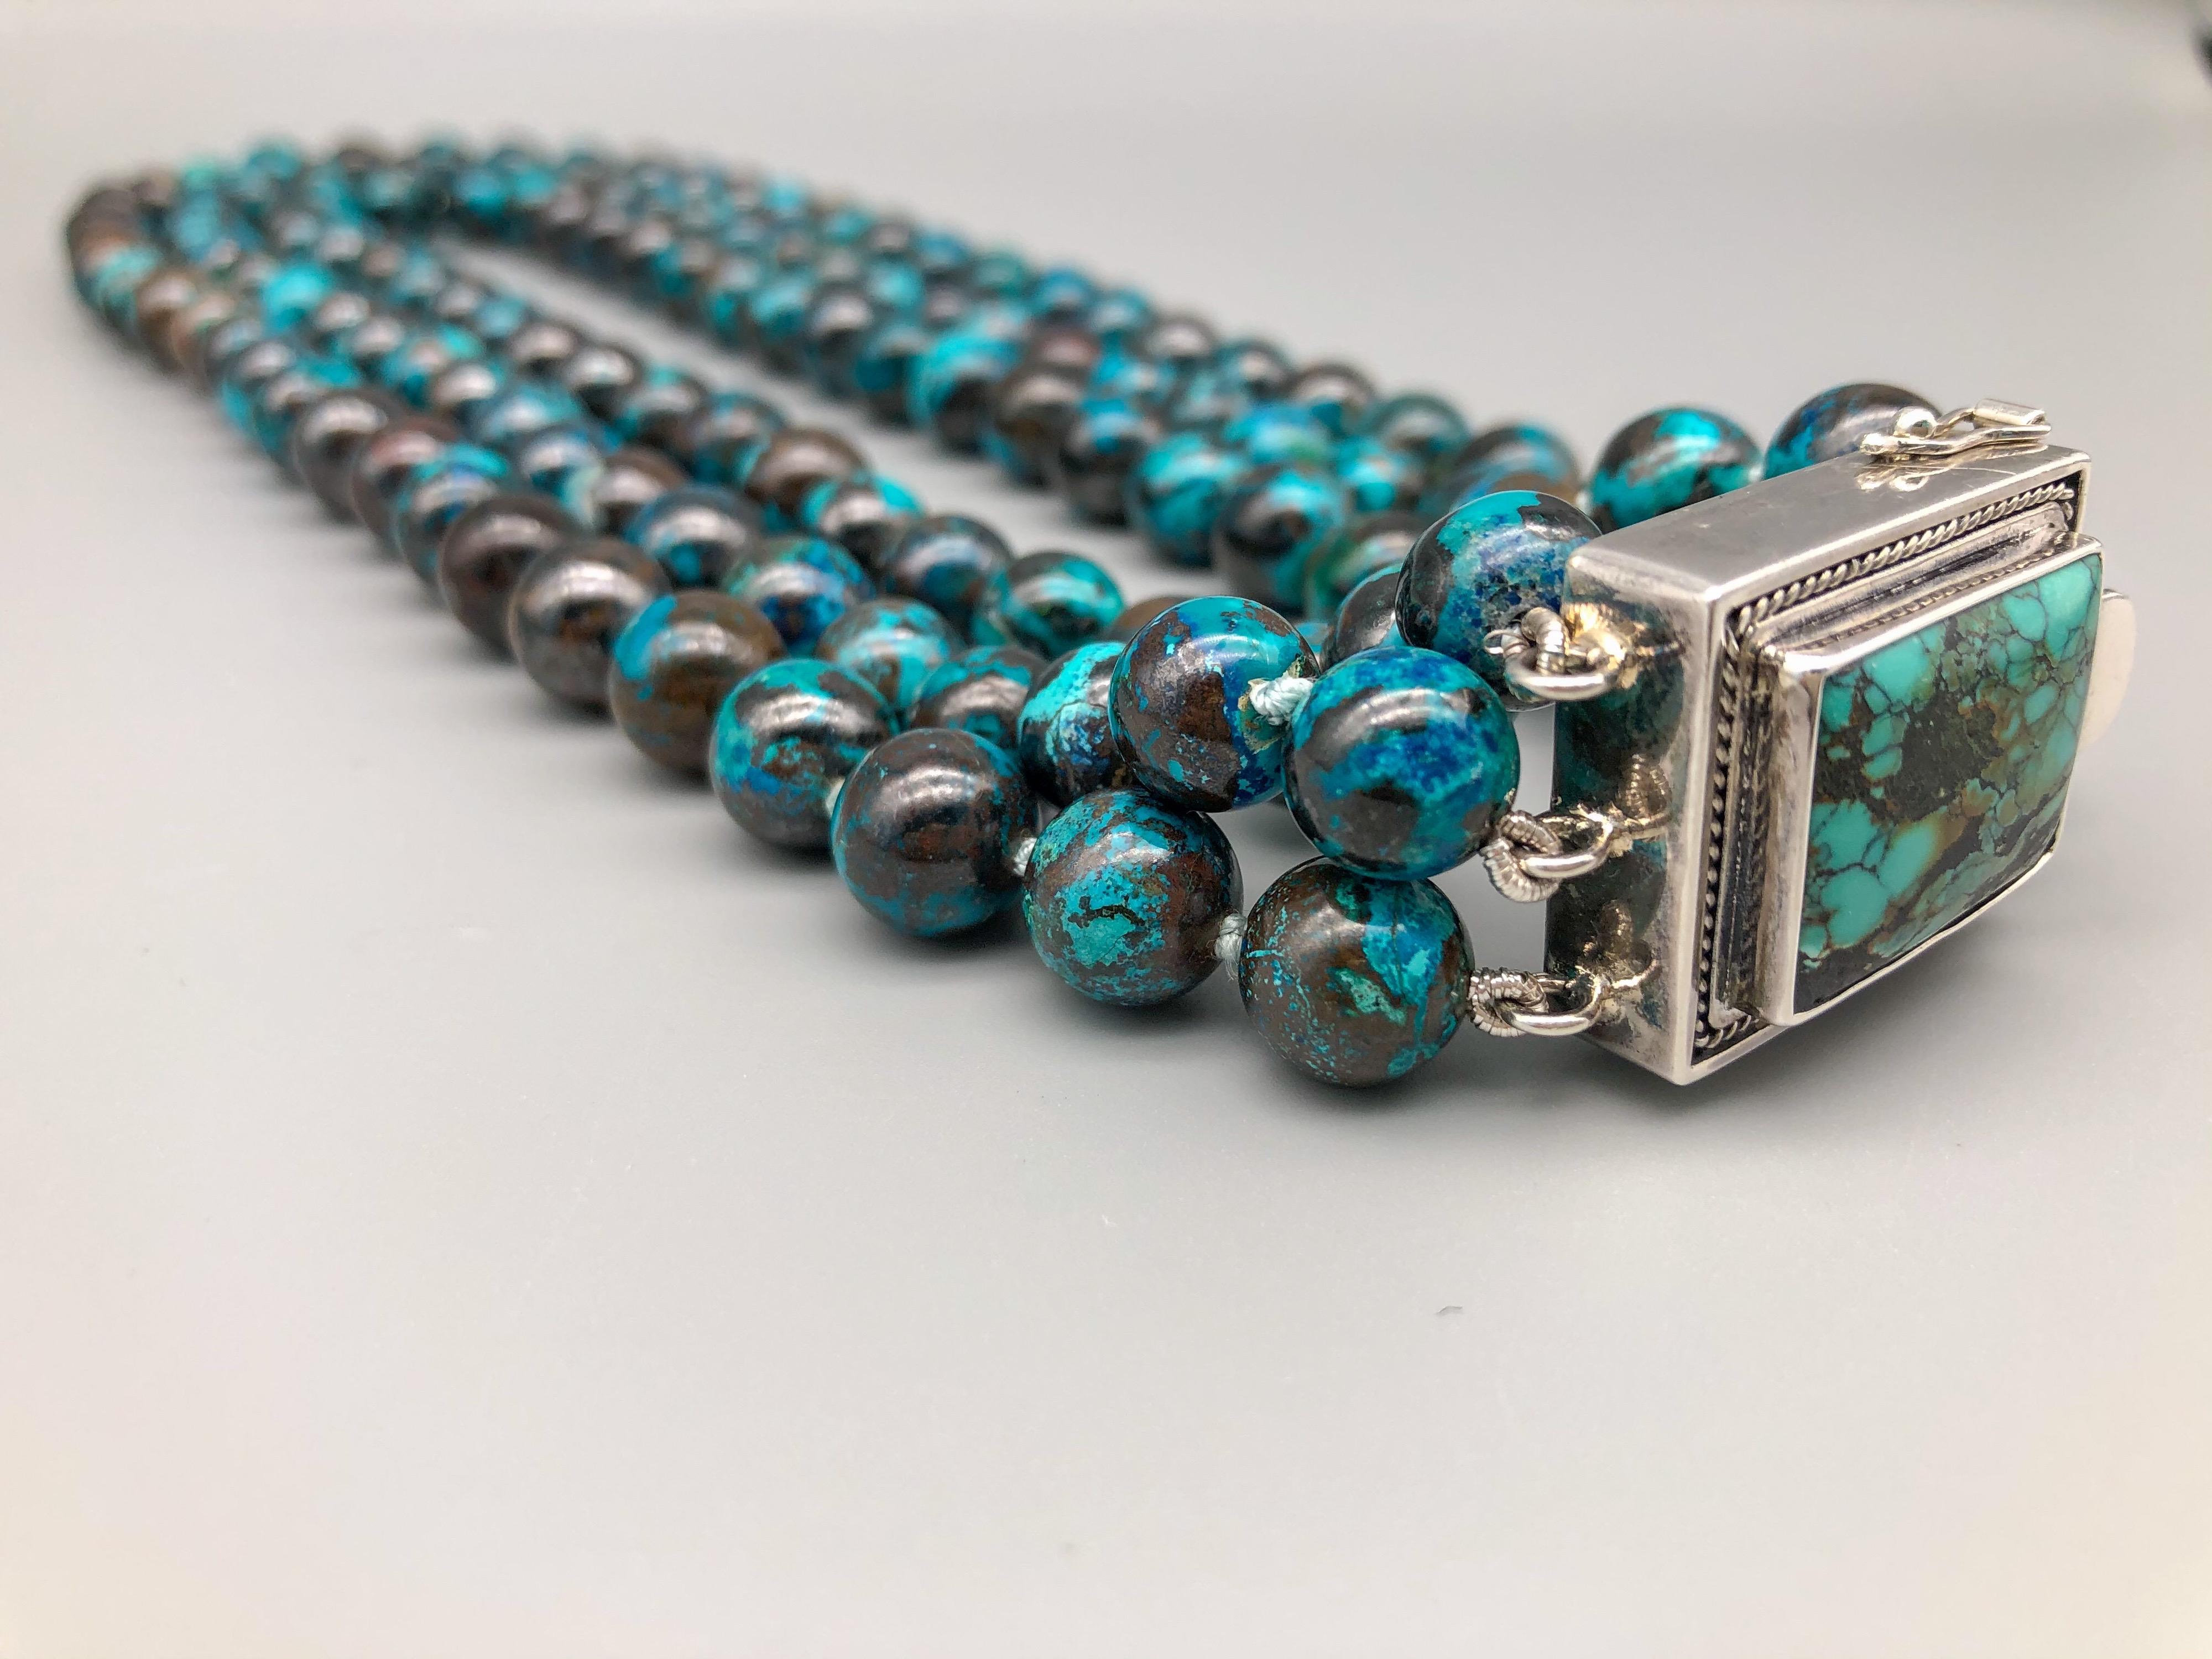 Women's A.Jeschel  3 strand Chrysocolla Necklace in a glorious Splash of color